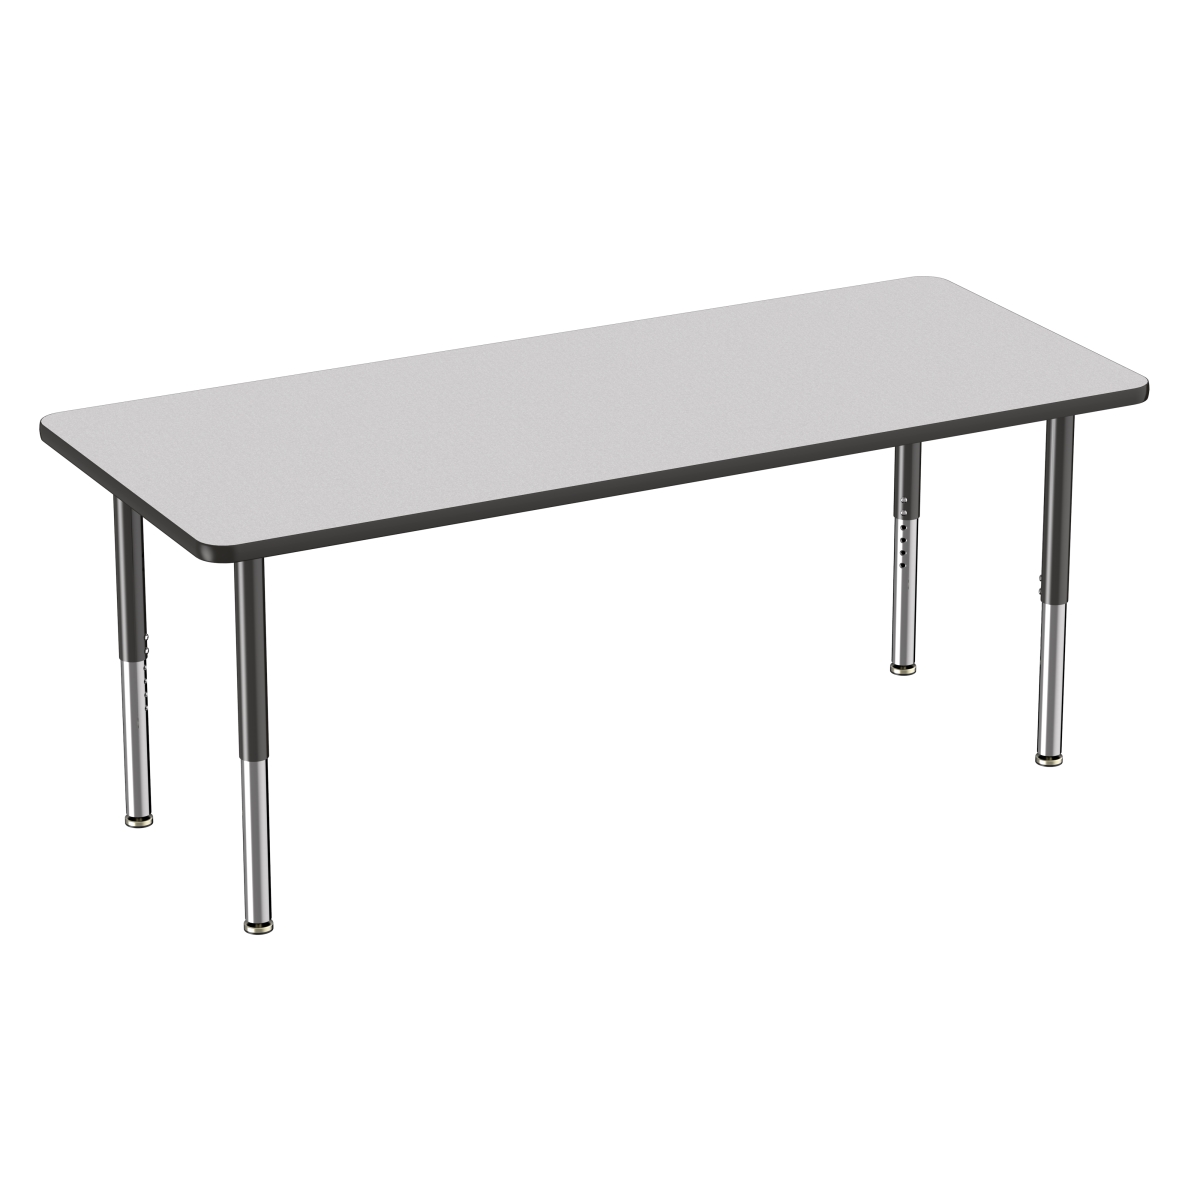 10030-gybk 30 X 72 In. Rectangle T-mold Adjustable Activity Table With Super Leg - Grey & Black